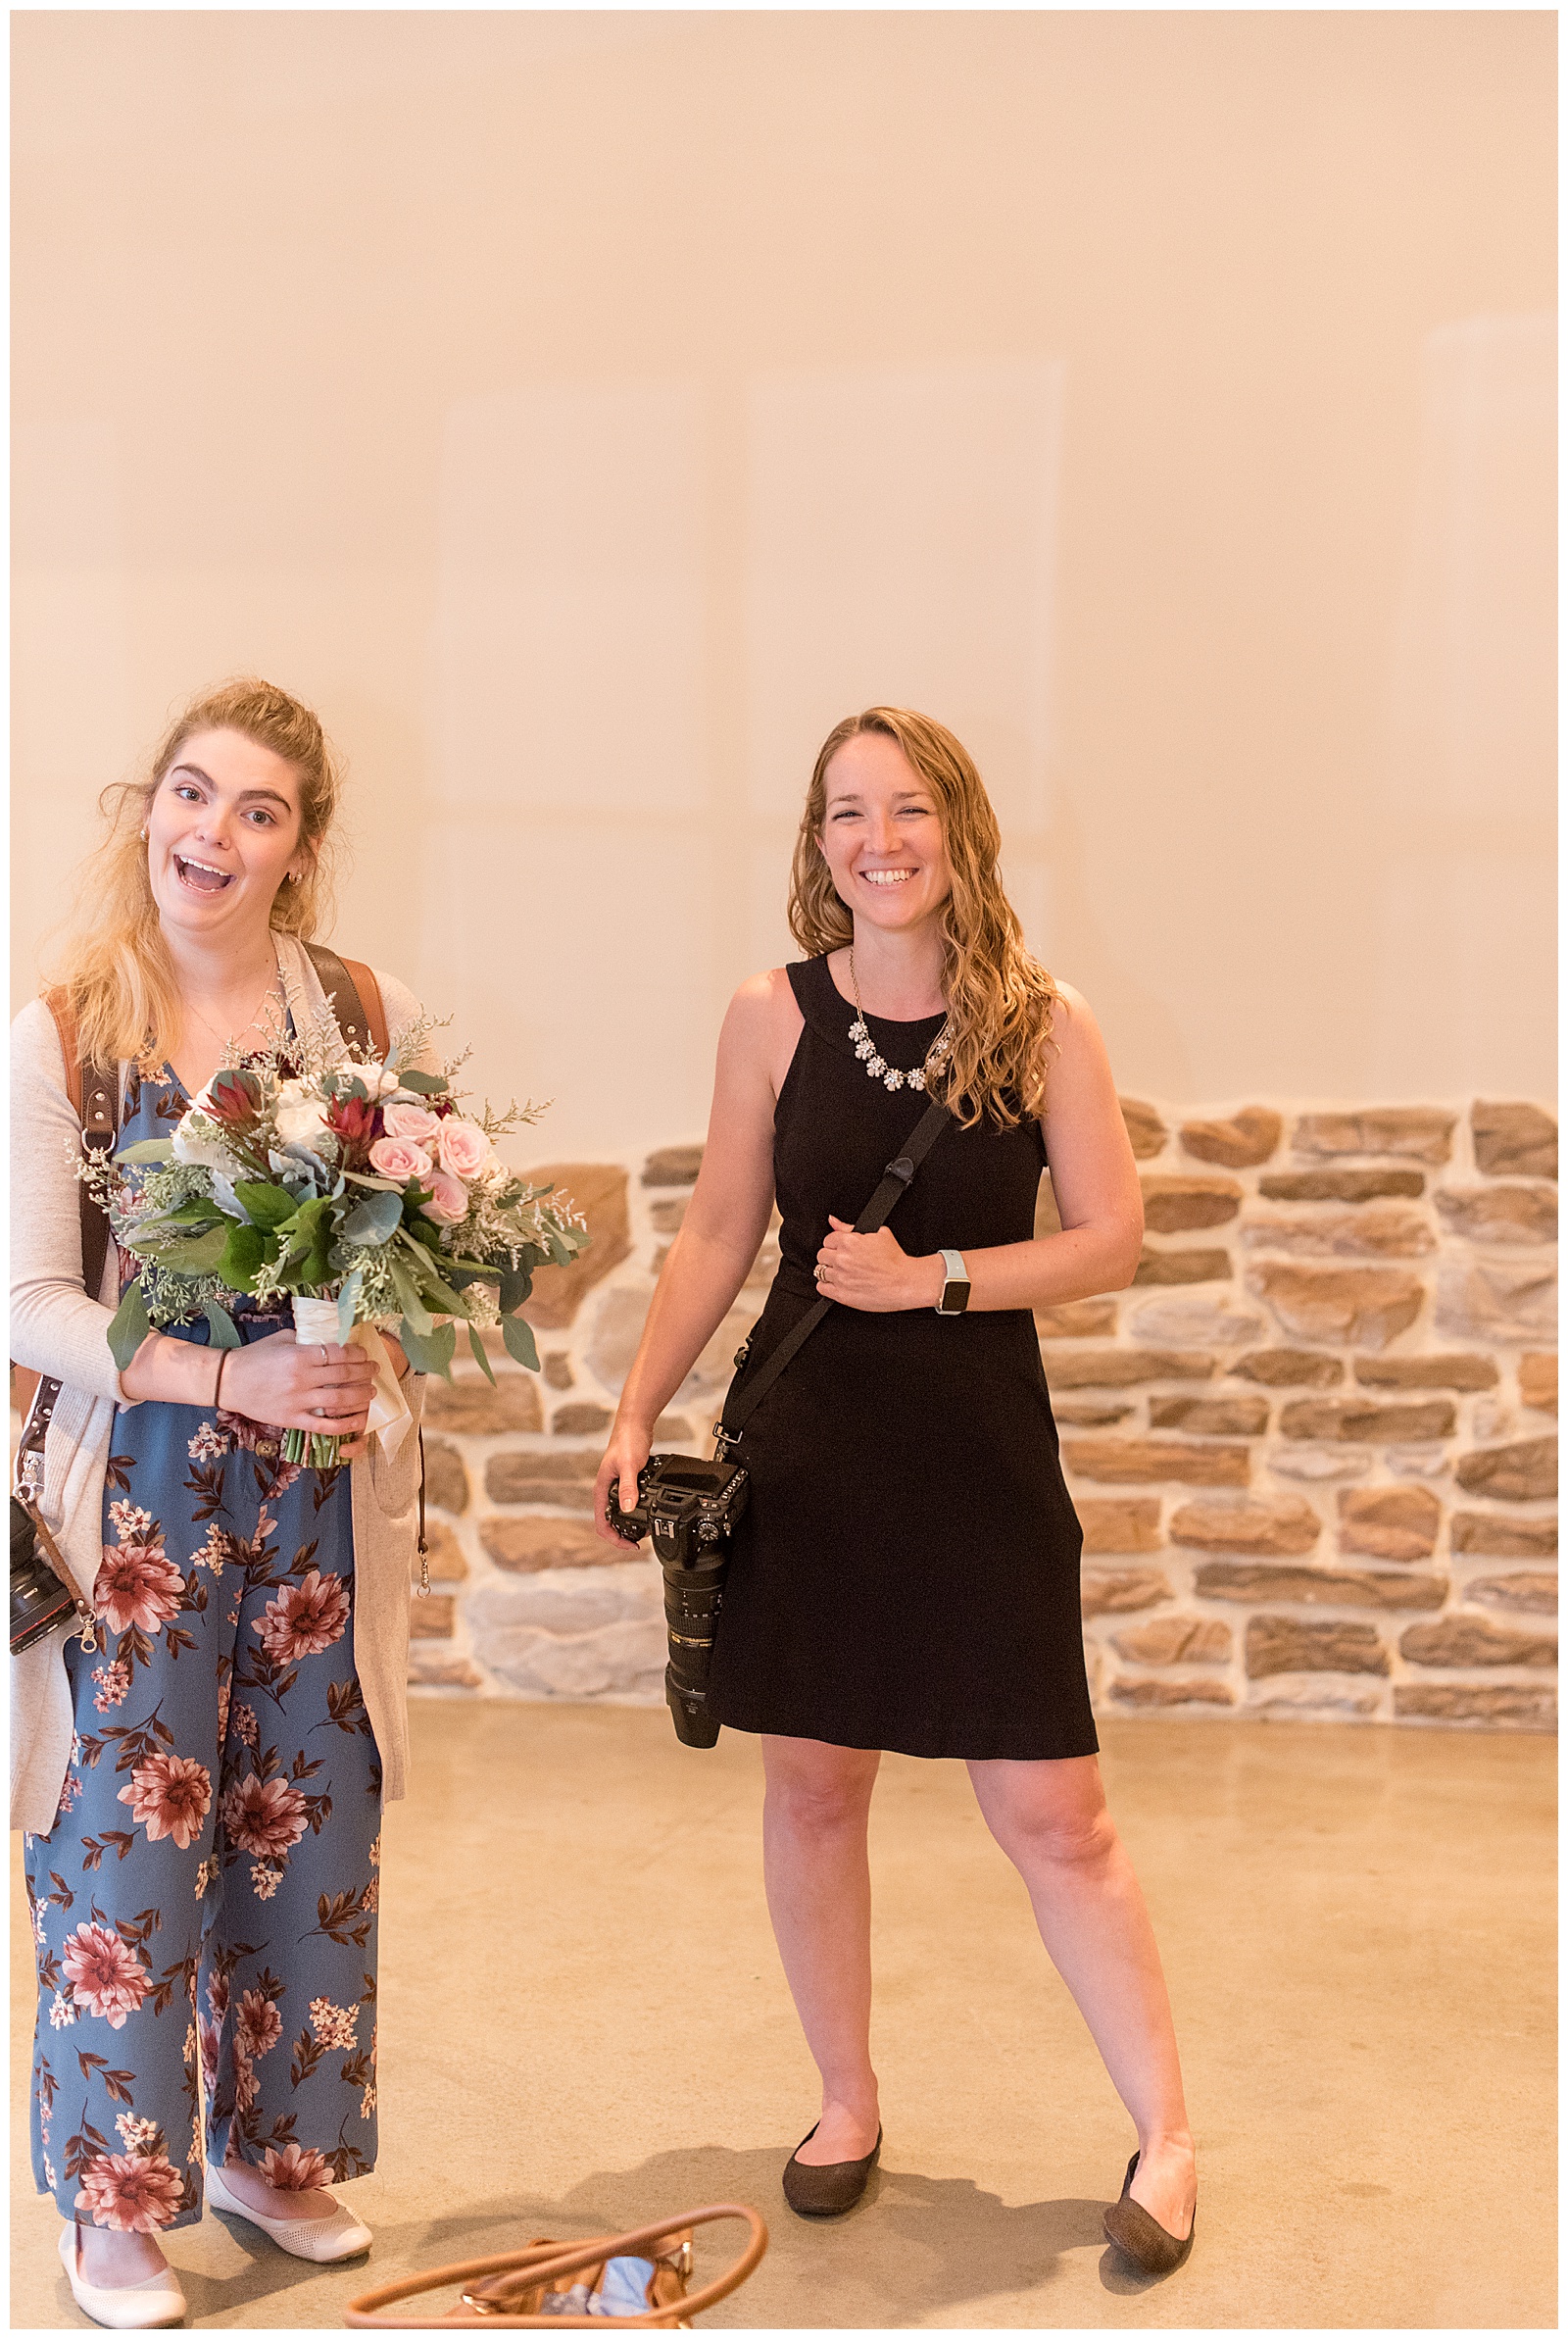 two photographers posing for a silly candid moment as one holds bride's bouquet and the other holds camera inside wedding venue with stone walls